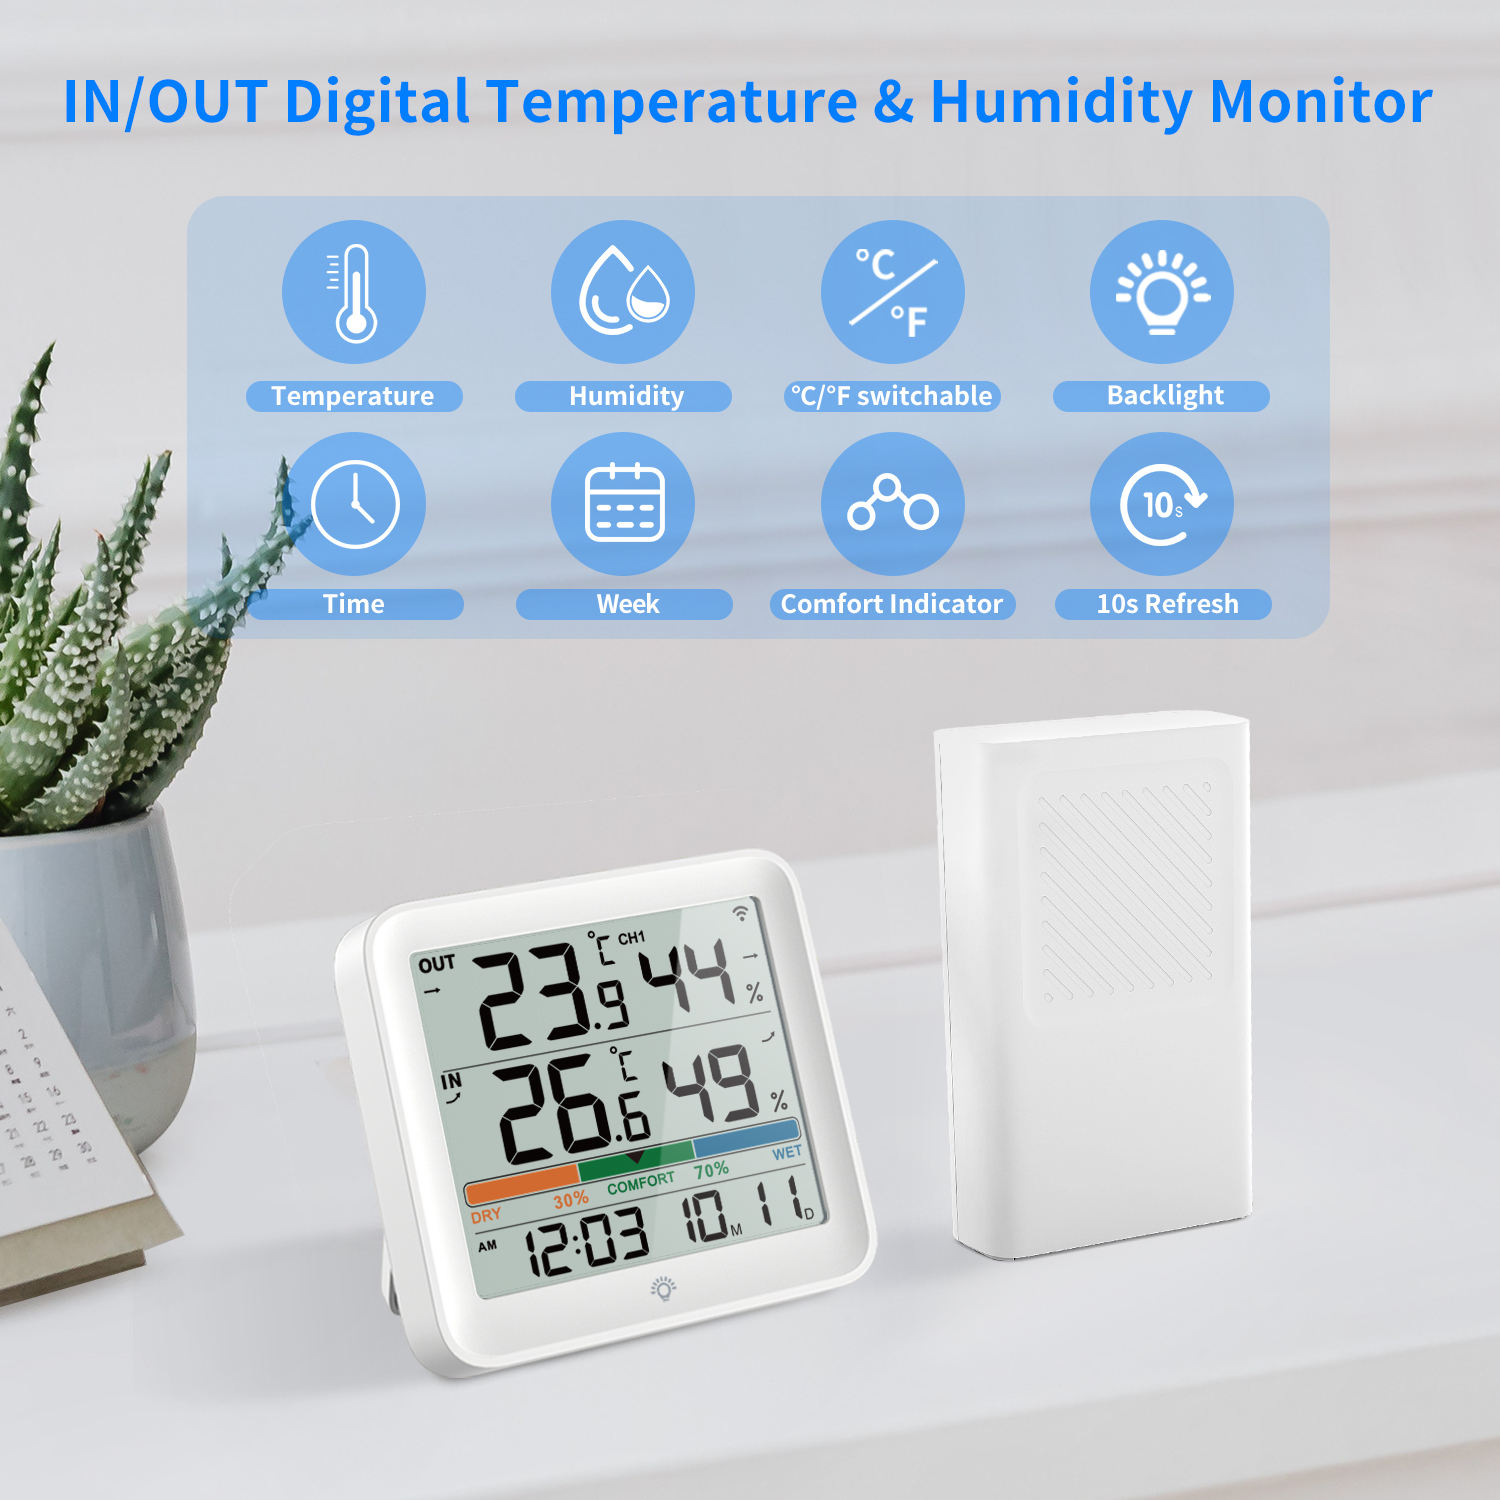 Babyroom Thermometer Humidity Meter LCD Display Digital Thermometer Hygrometer High Sensitive Fast Read Waterproof for outdoor